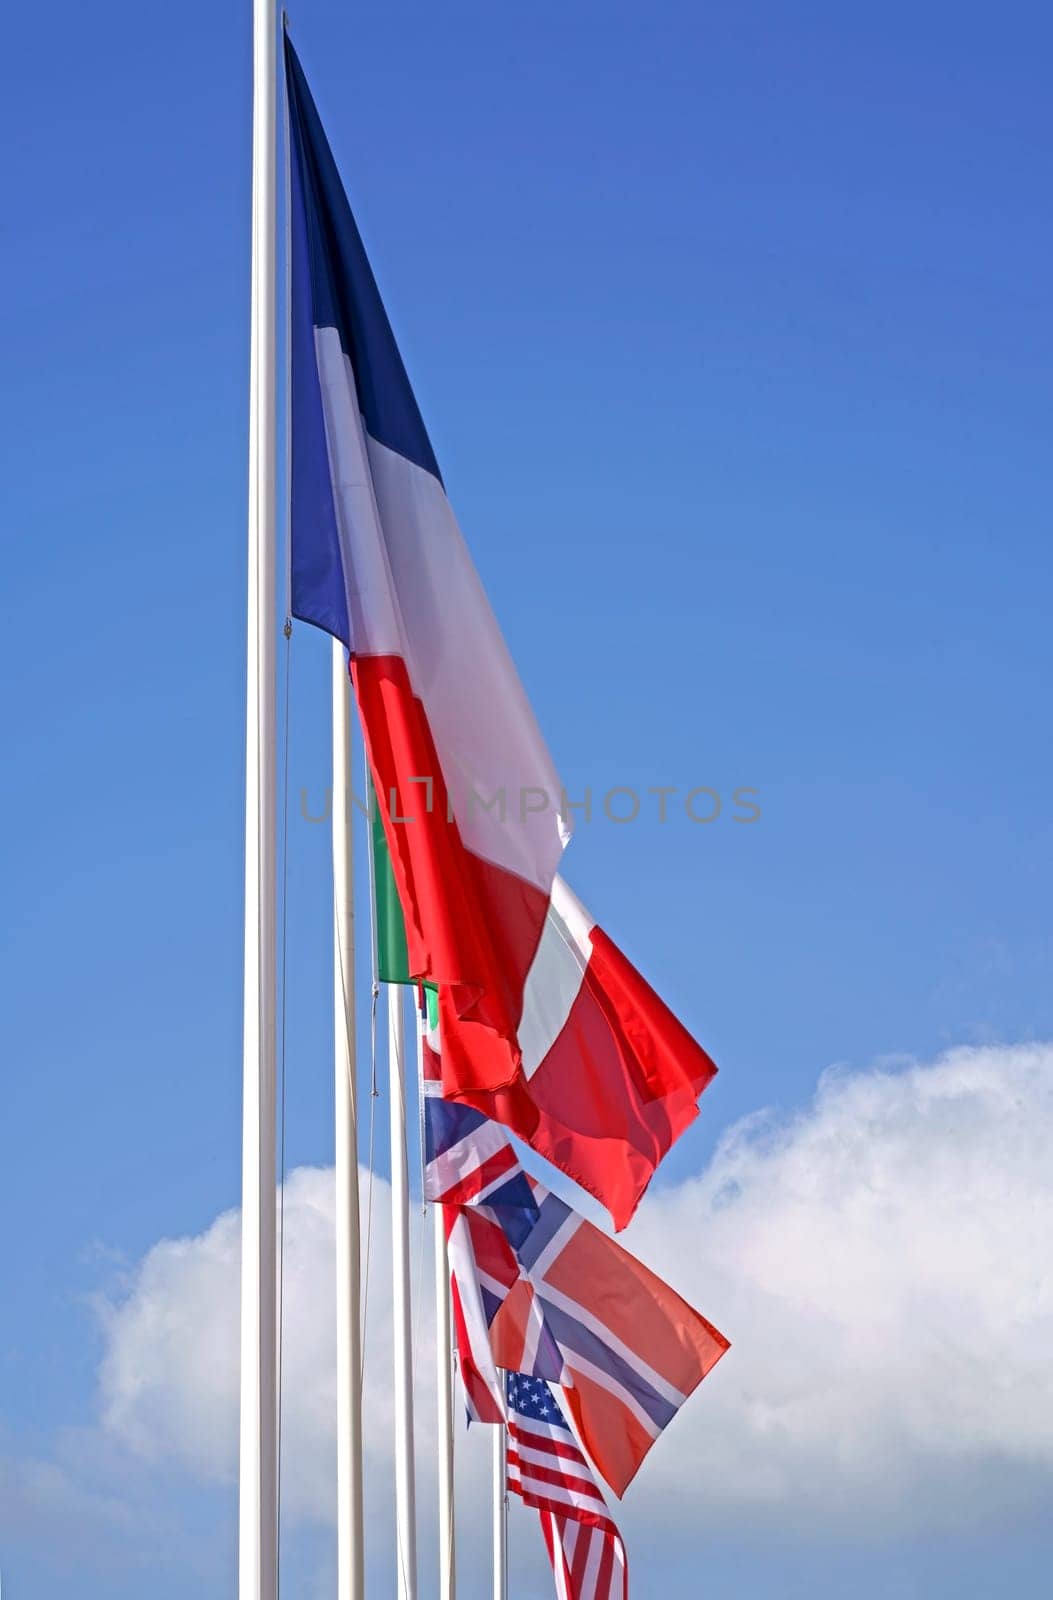 International Flags blowing in the wind against a blue sky. Flags of Italy France Great Britain and America against the blue sky. by aprilphoto